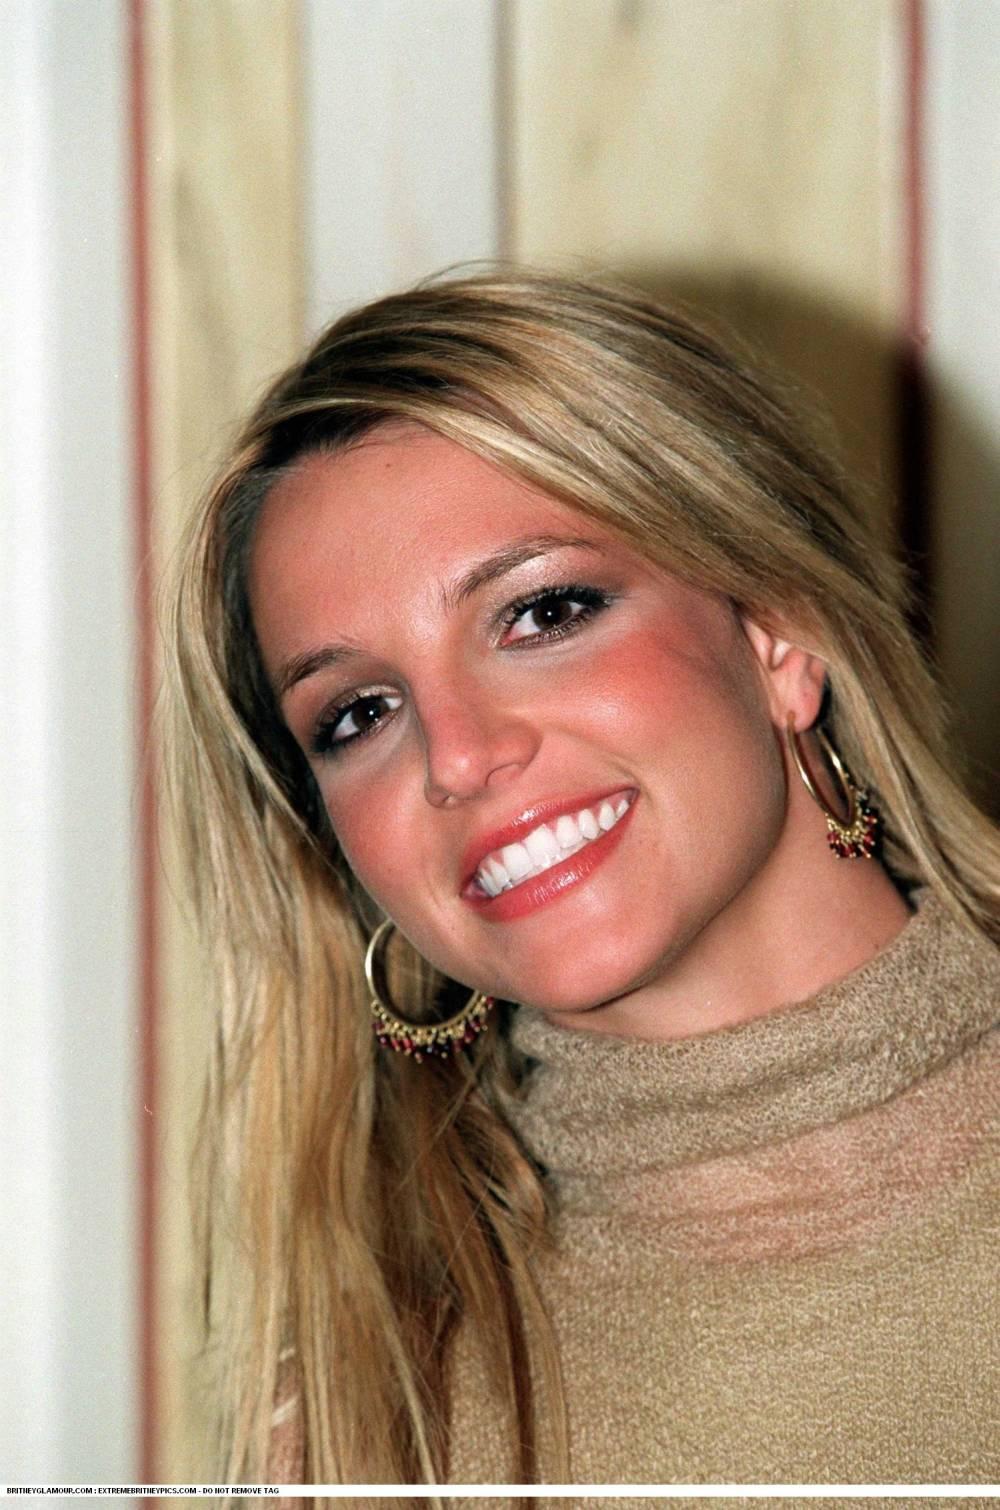 Britney Spears photo 1525 of 8035 pics, wallpaper - photo #146142 ...